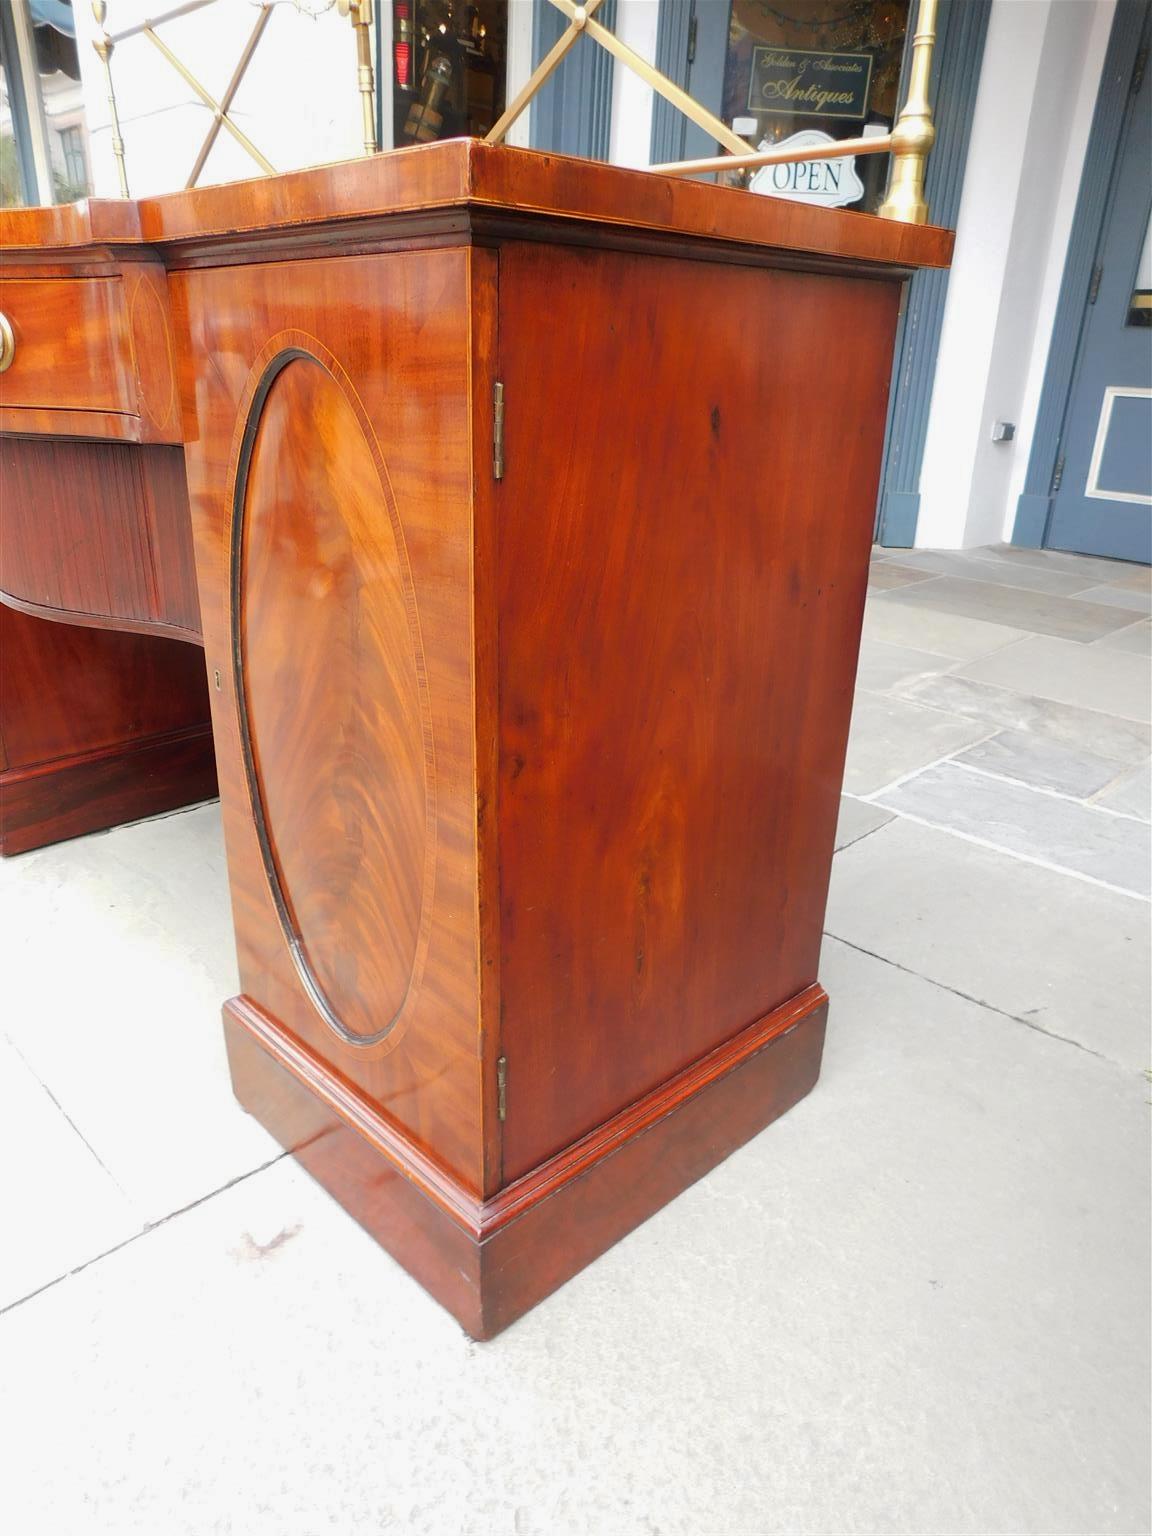 English Regency Mahogany Bow Front Brass Finial Gallery Sideboard, Circa 1780 For Sale 5